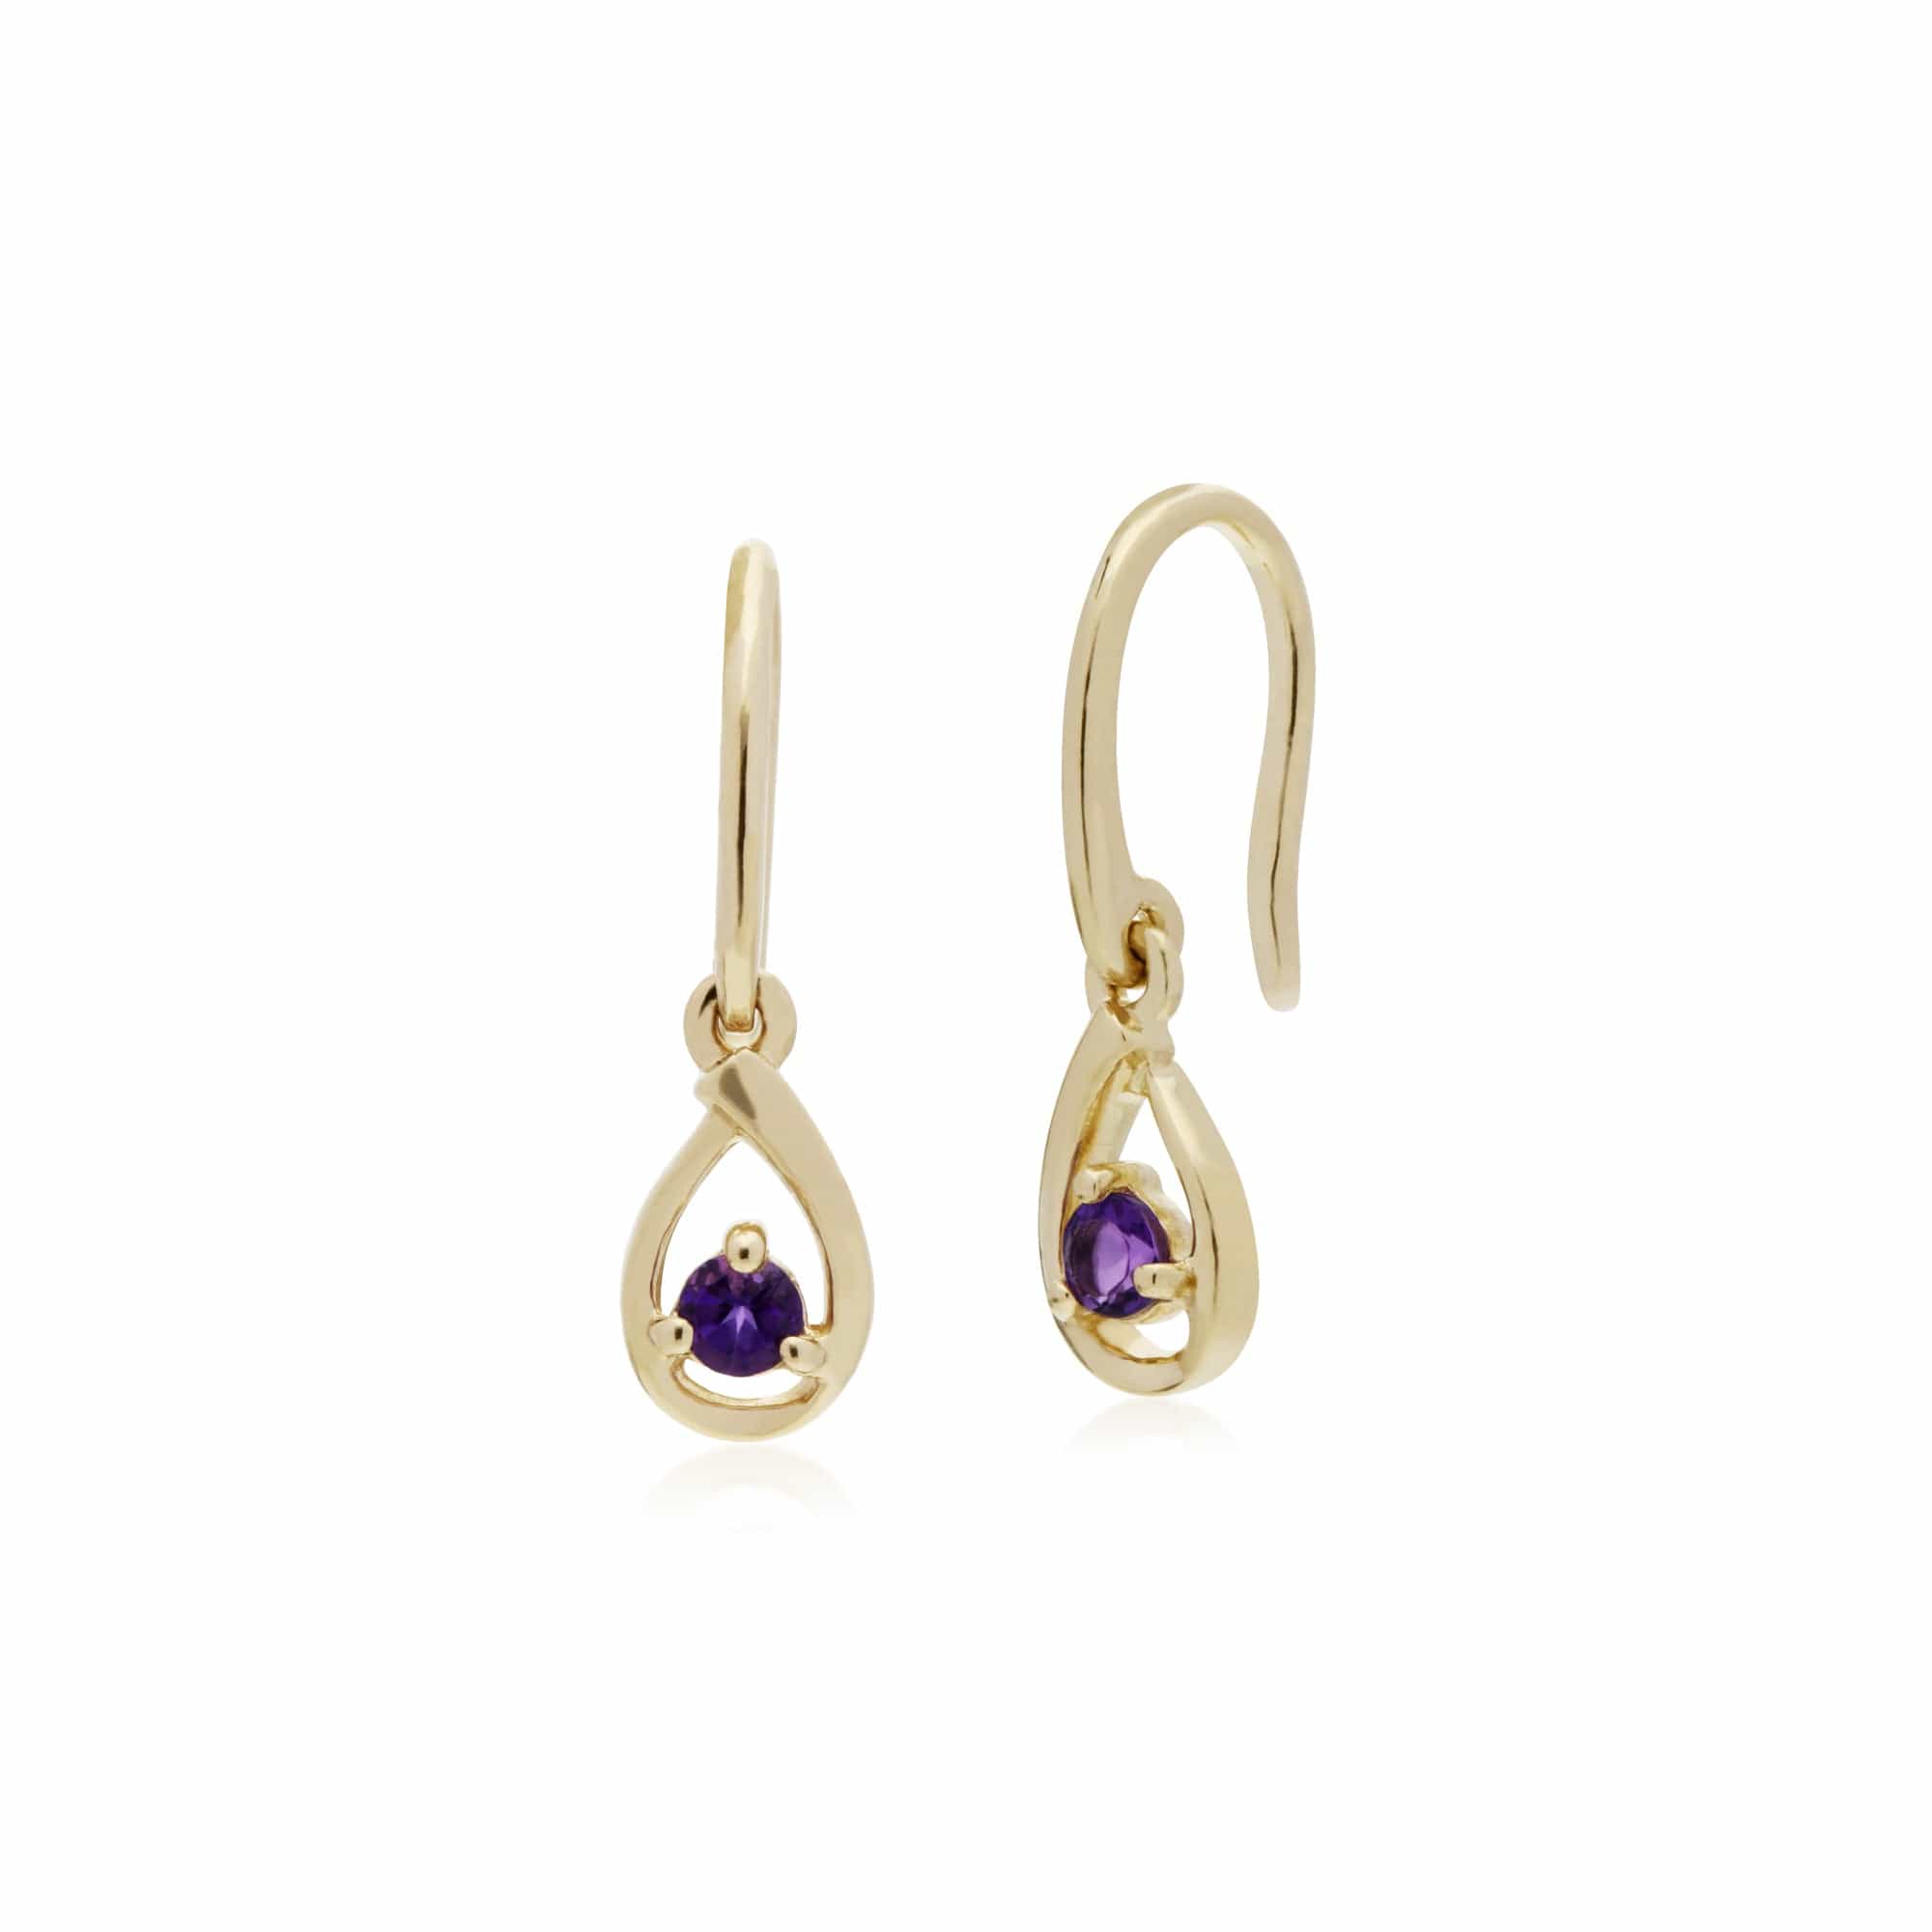 135E1190059-135P1551059 Classic Round Amethyst Single Stone Tear Drop Earrings & Necklace Set in 9ct Yellow Gold 2